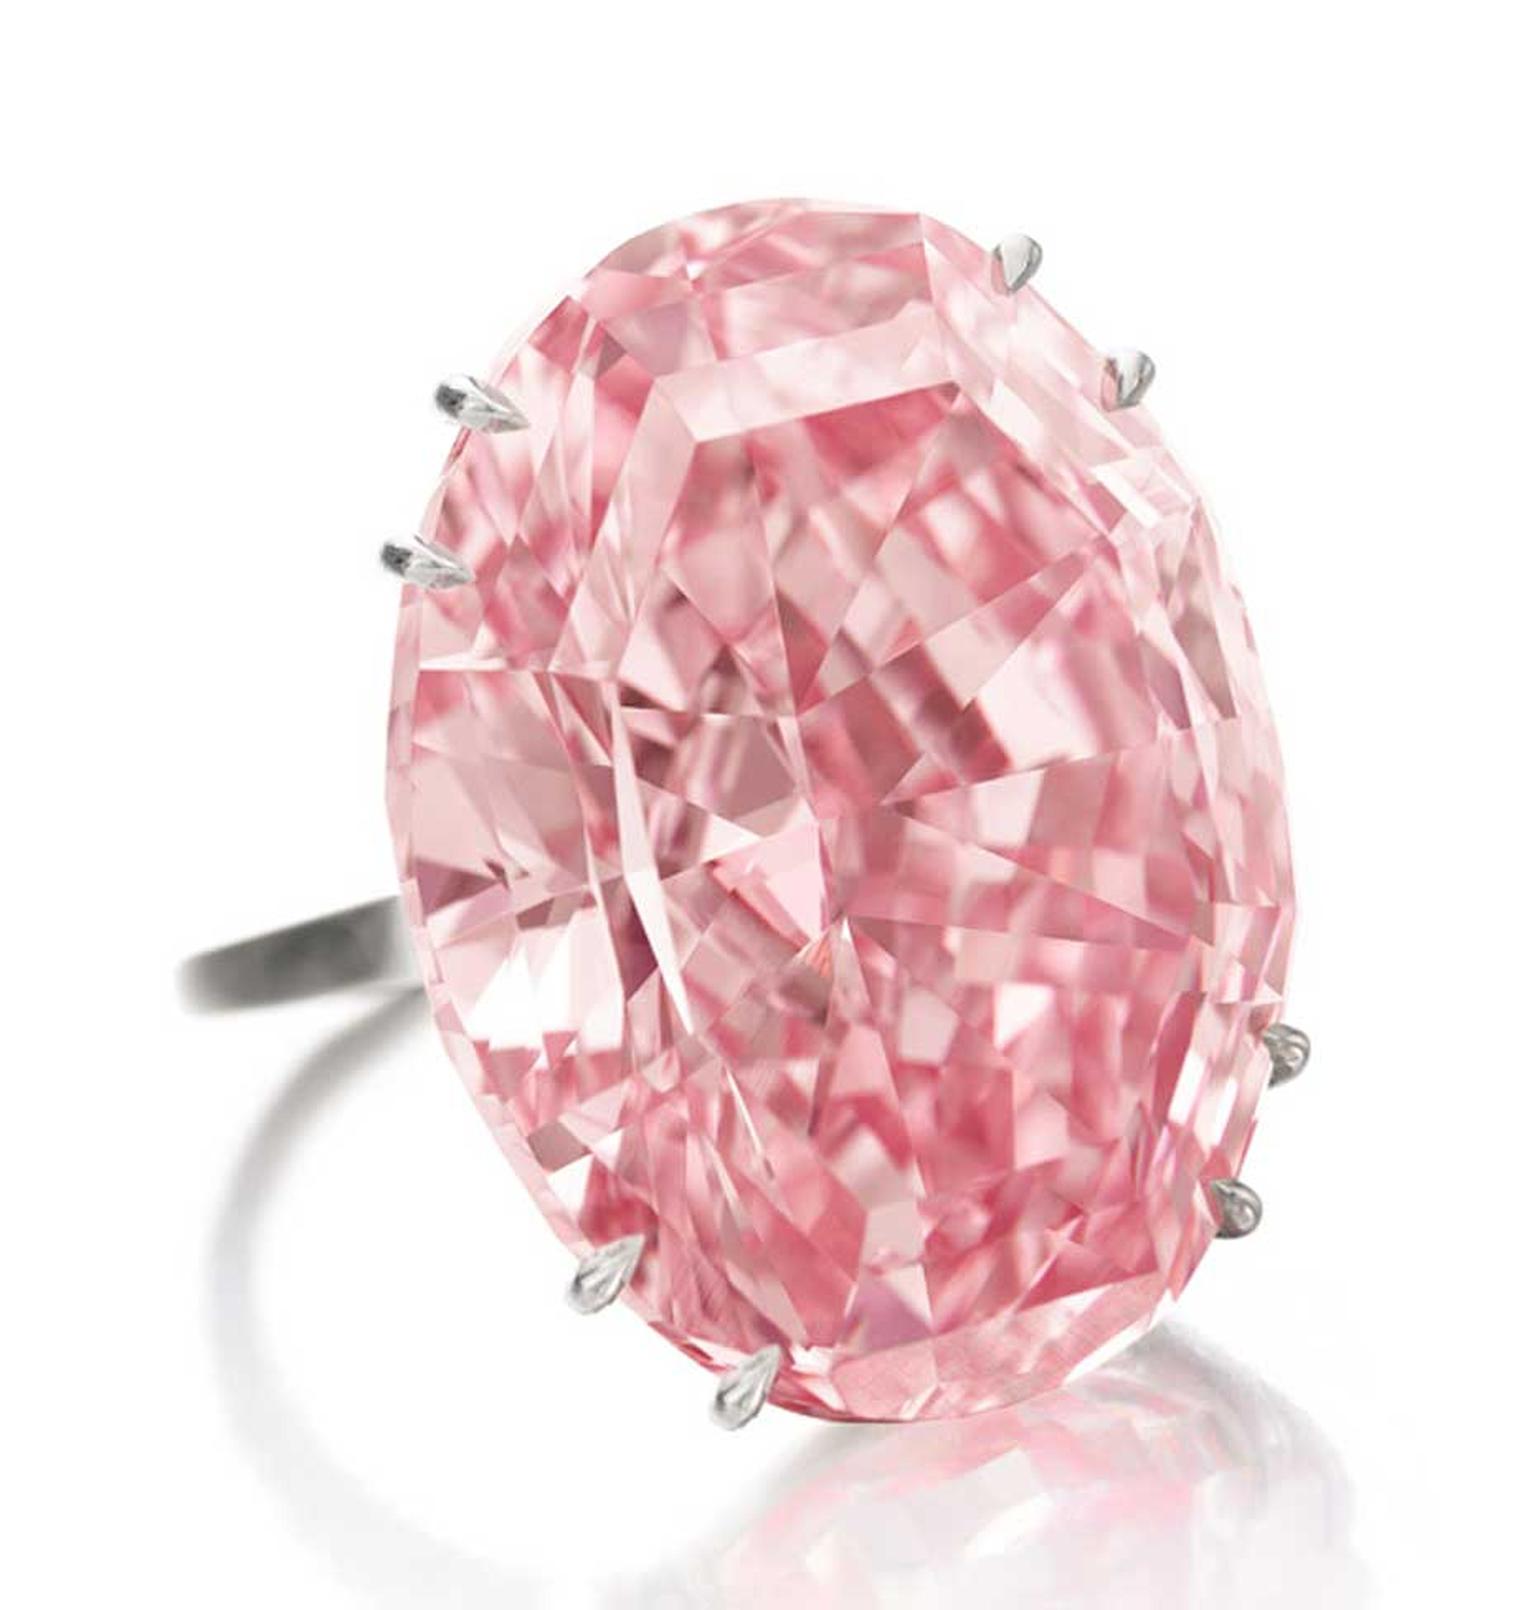 Pink diamonds: a modern history of one of the most valuable gems in the world